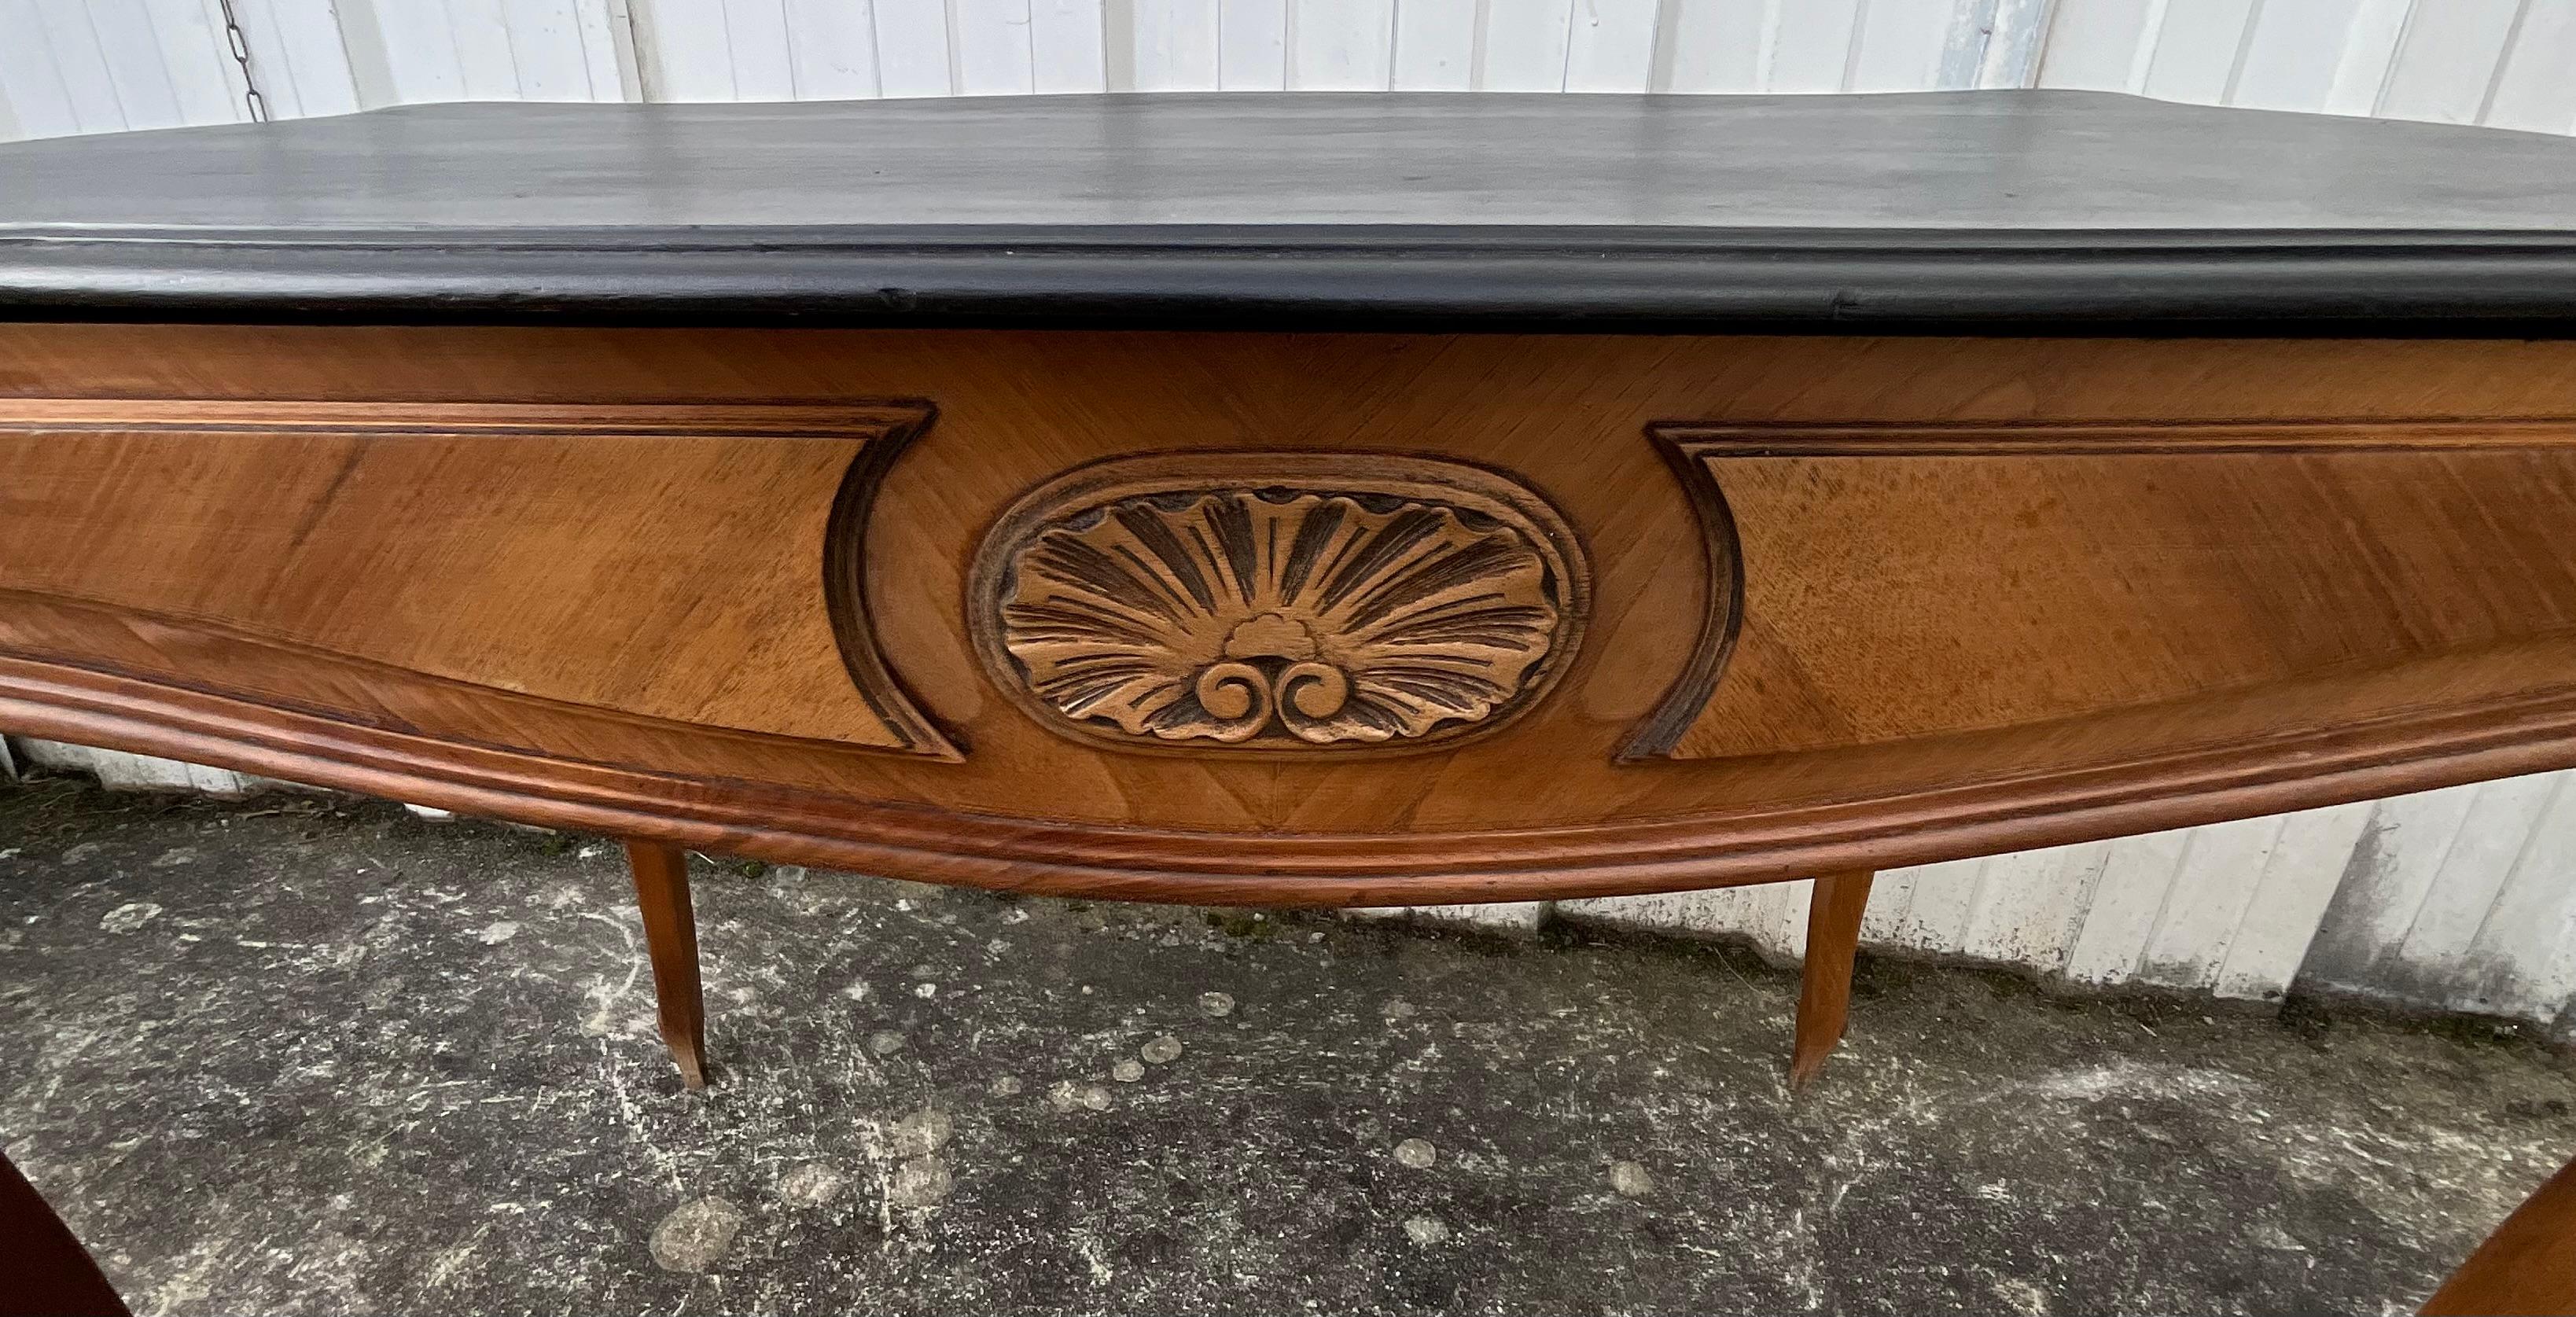 This table is molded. Its scalloped belt opens to a drawer.

The drawer is dovetail mounted to ensure perfect solidity. The drawer can be opened daily and hold many objects. It slides perfectly.

This table rests on four arched legs and each ending